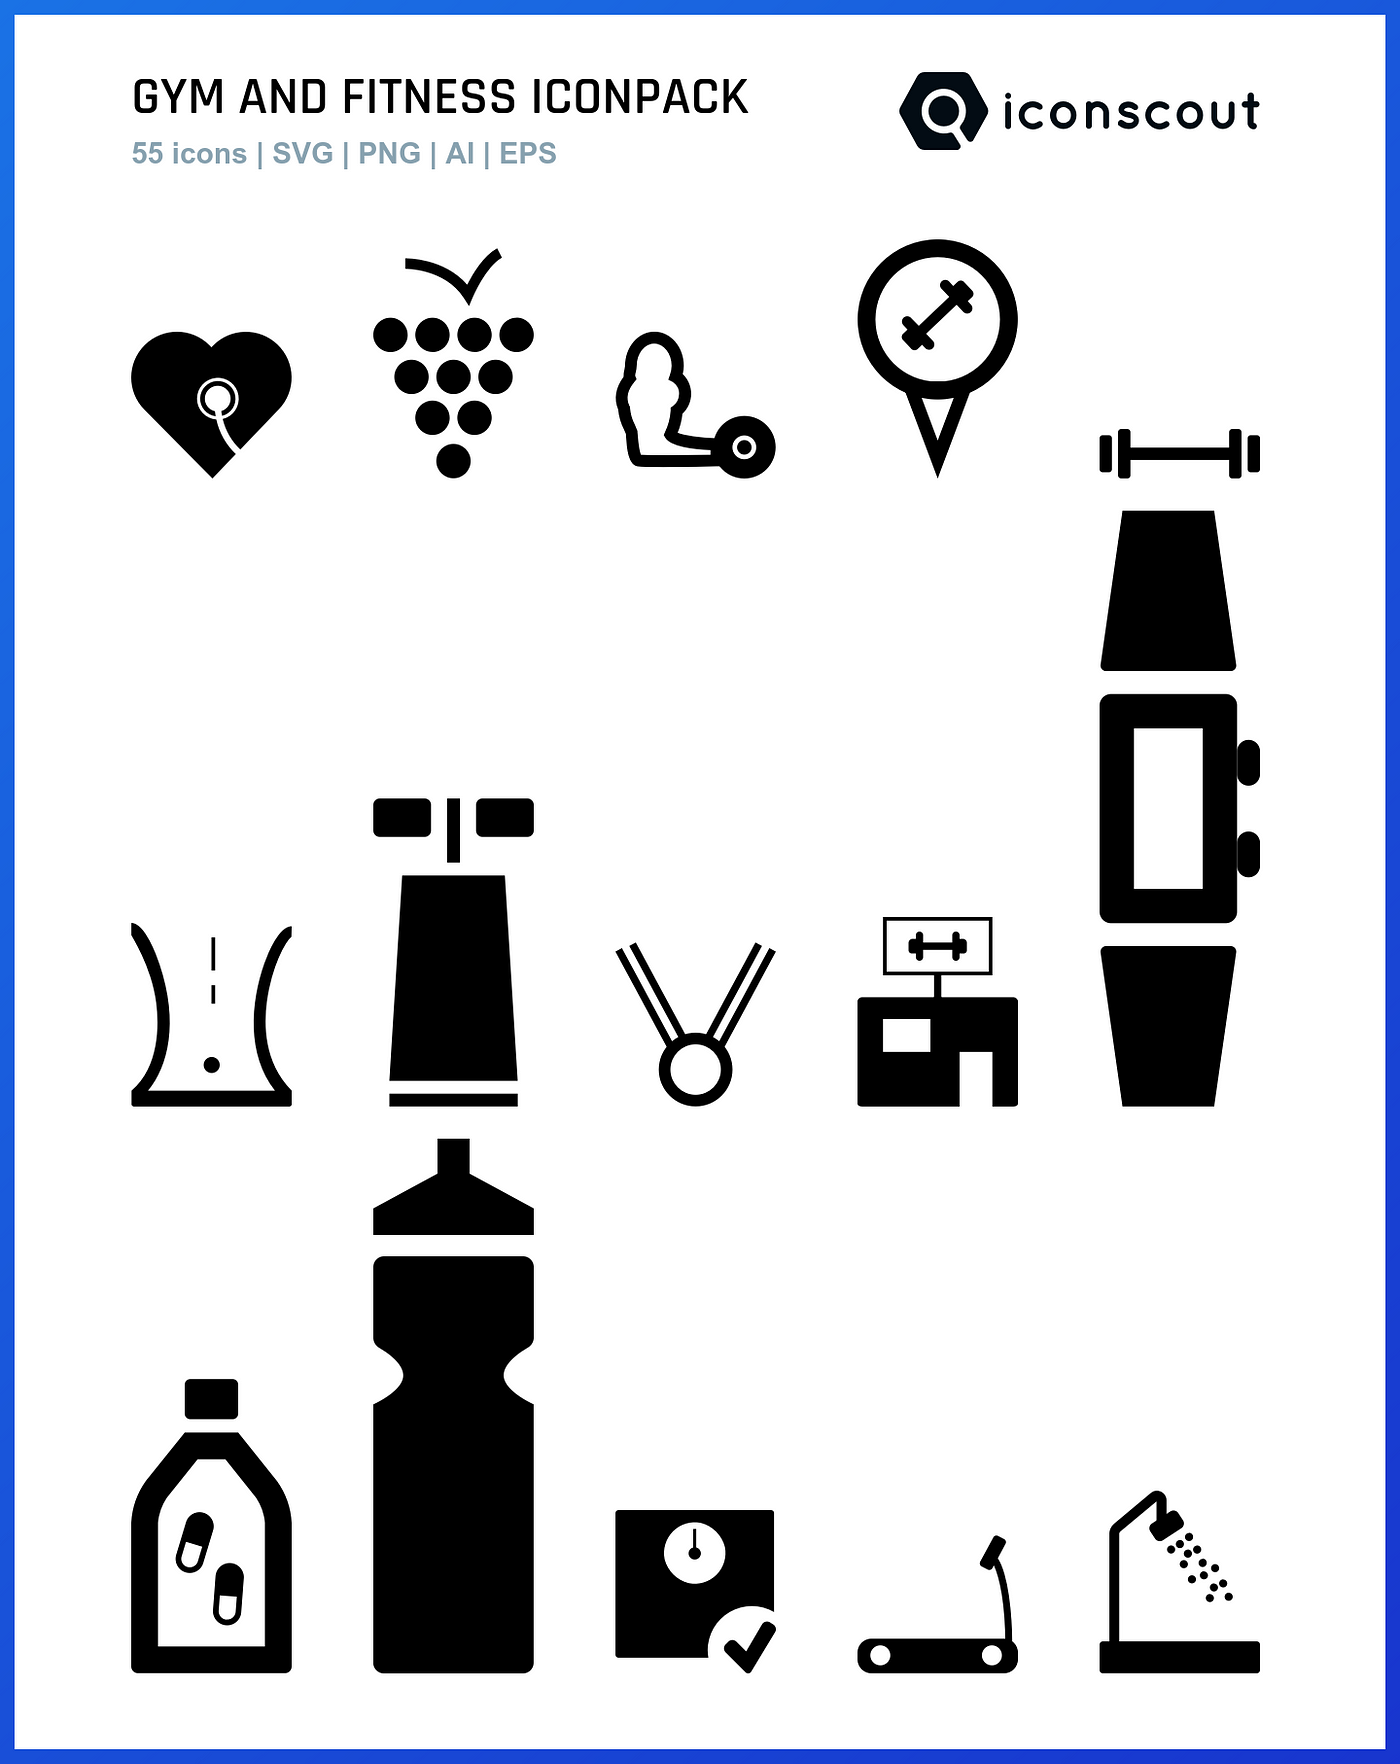 500+ Gym and Fitness icons, AI, EPS, SVG, PNG